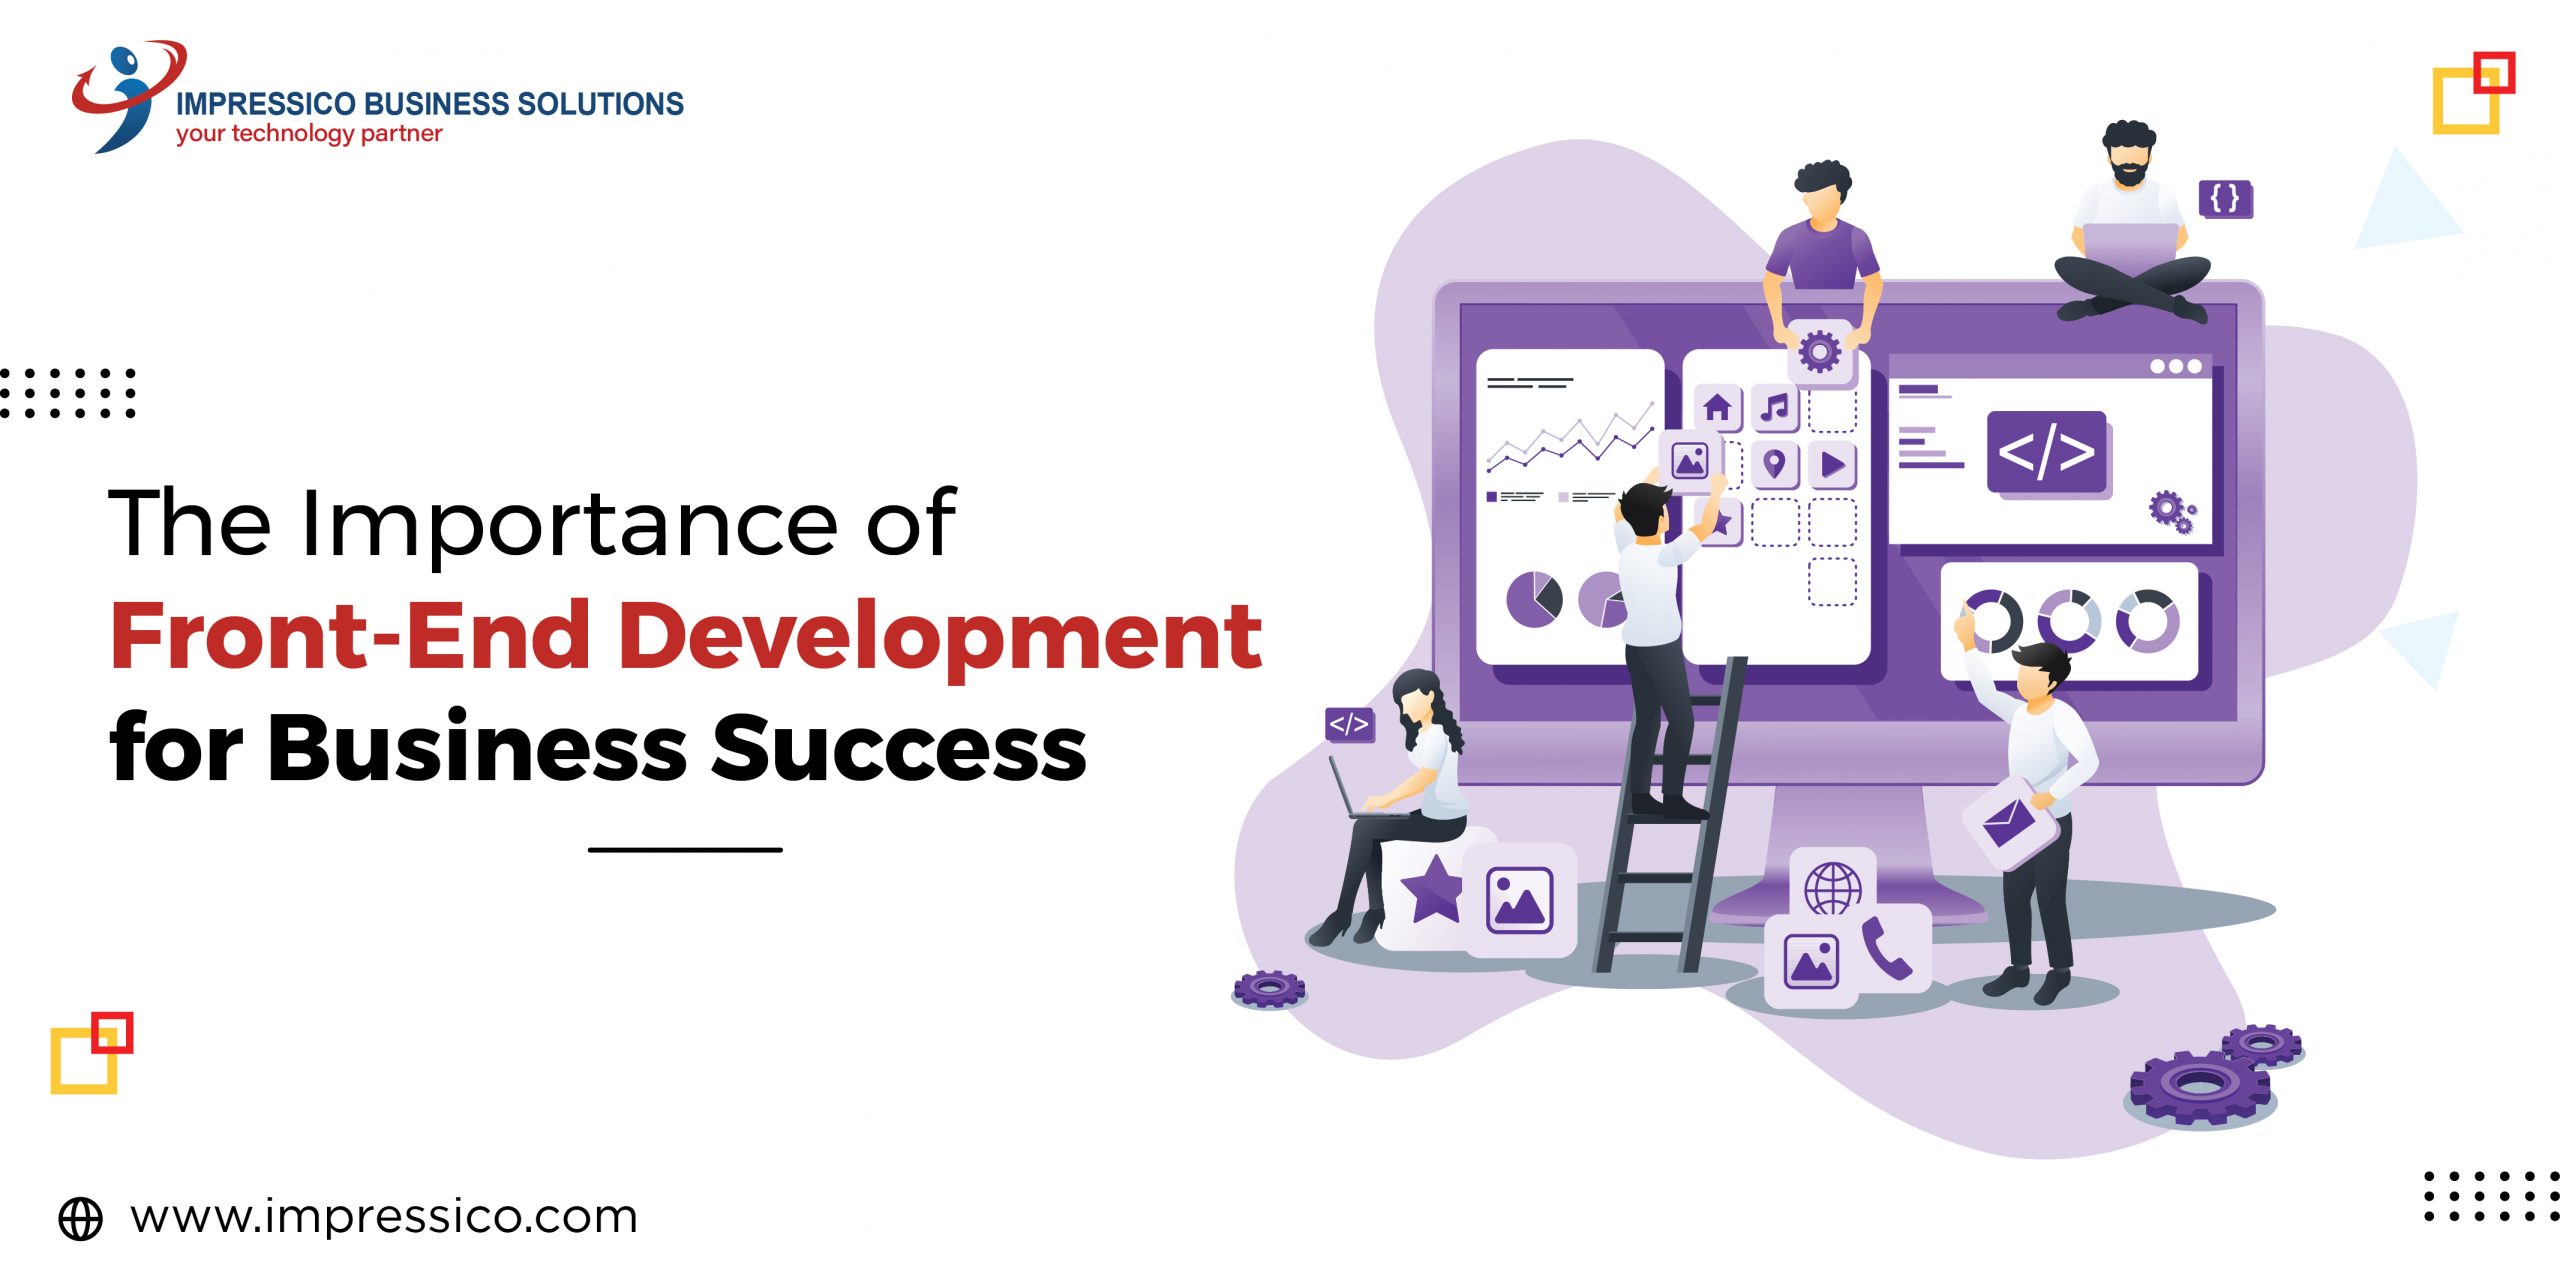 Importance of Front-End Development for Business Success